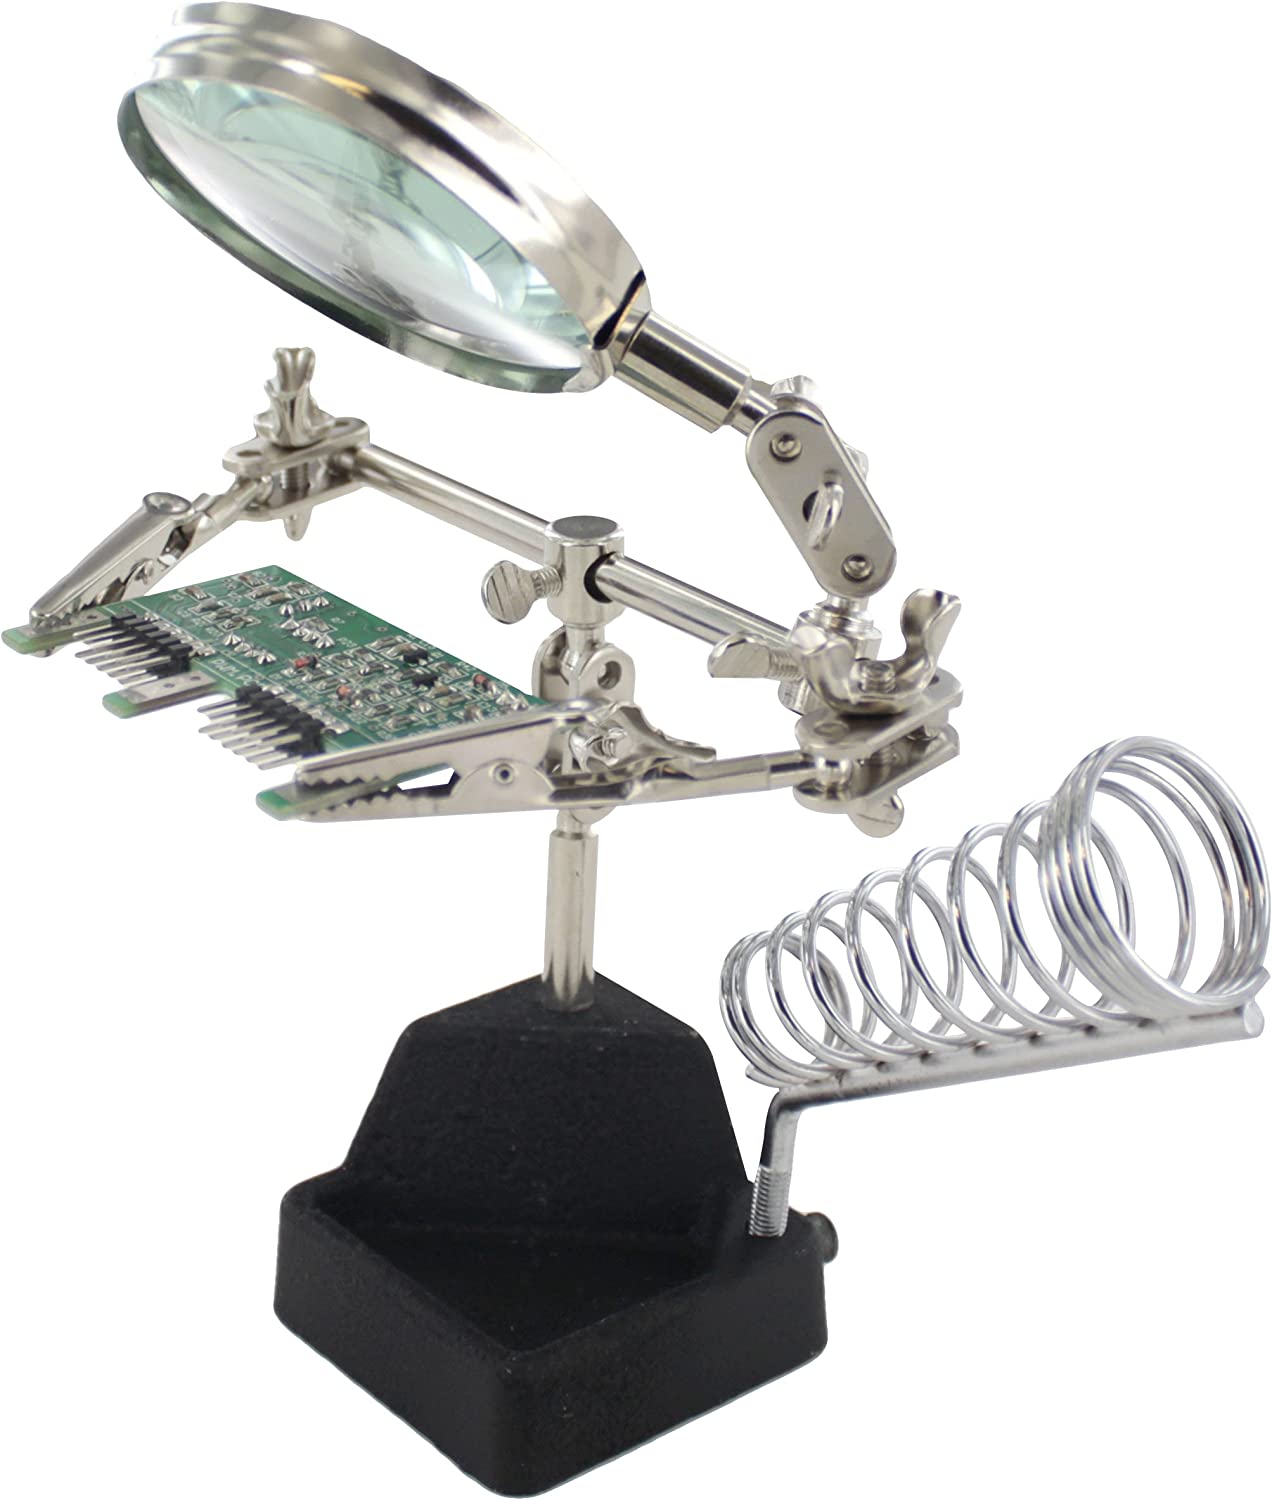 Miyako USA Helping Hand with Magnifying Glass and Solder Iron Stand Helping hand with magnifying glass. Designed with the pyrography, electrician, jeweler, and everyday user in mind, this helping hand is perfect for soldering-HH-4